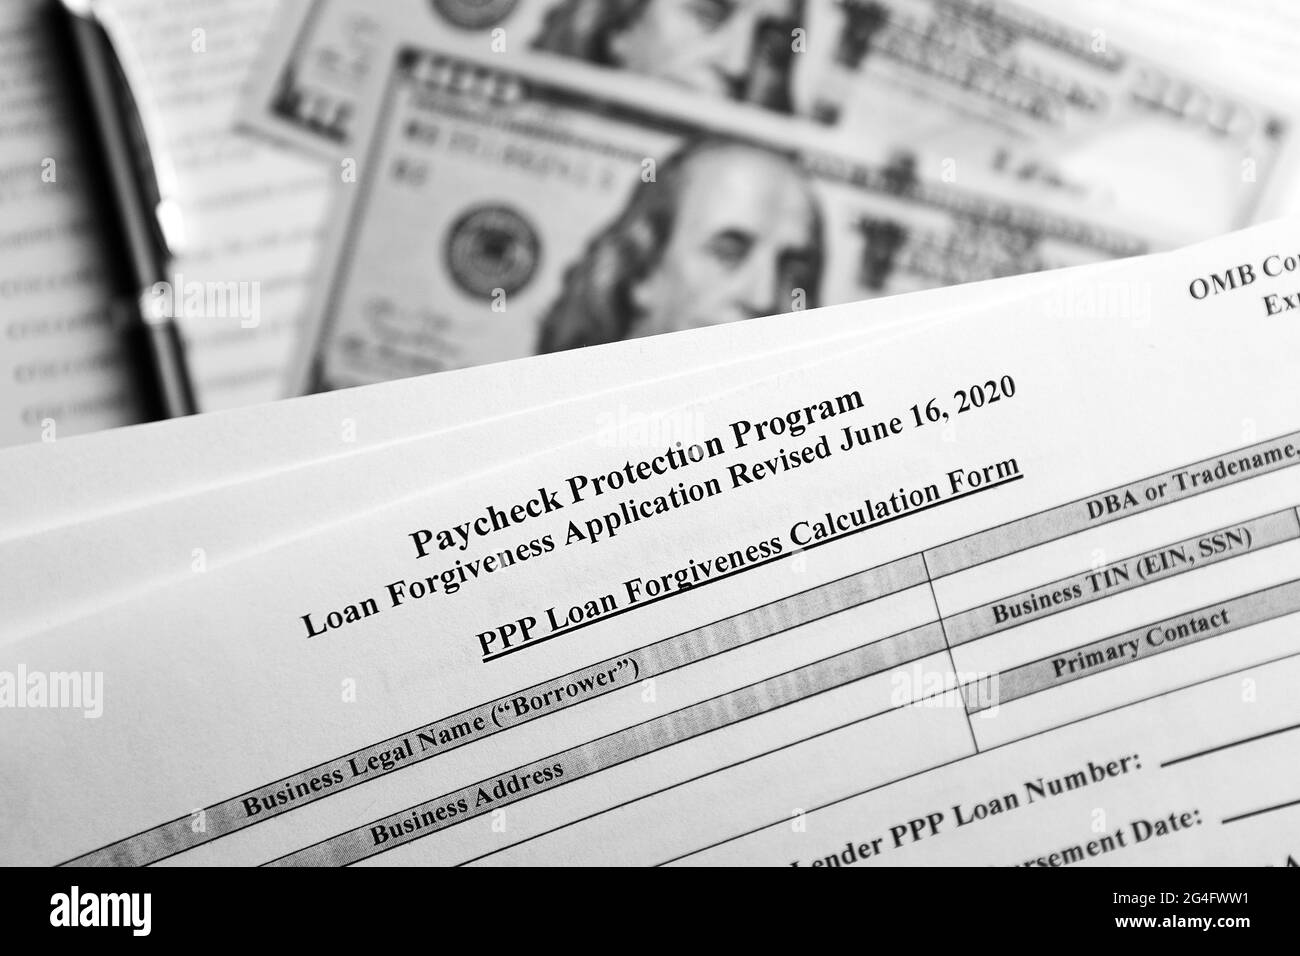 selective focus monochrome photo of paycheck protection program loan forgiveness application form revised, on a background of dollar bills and a pen Stock Photo